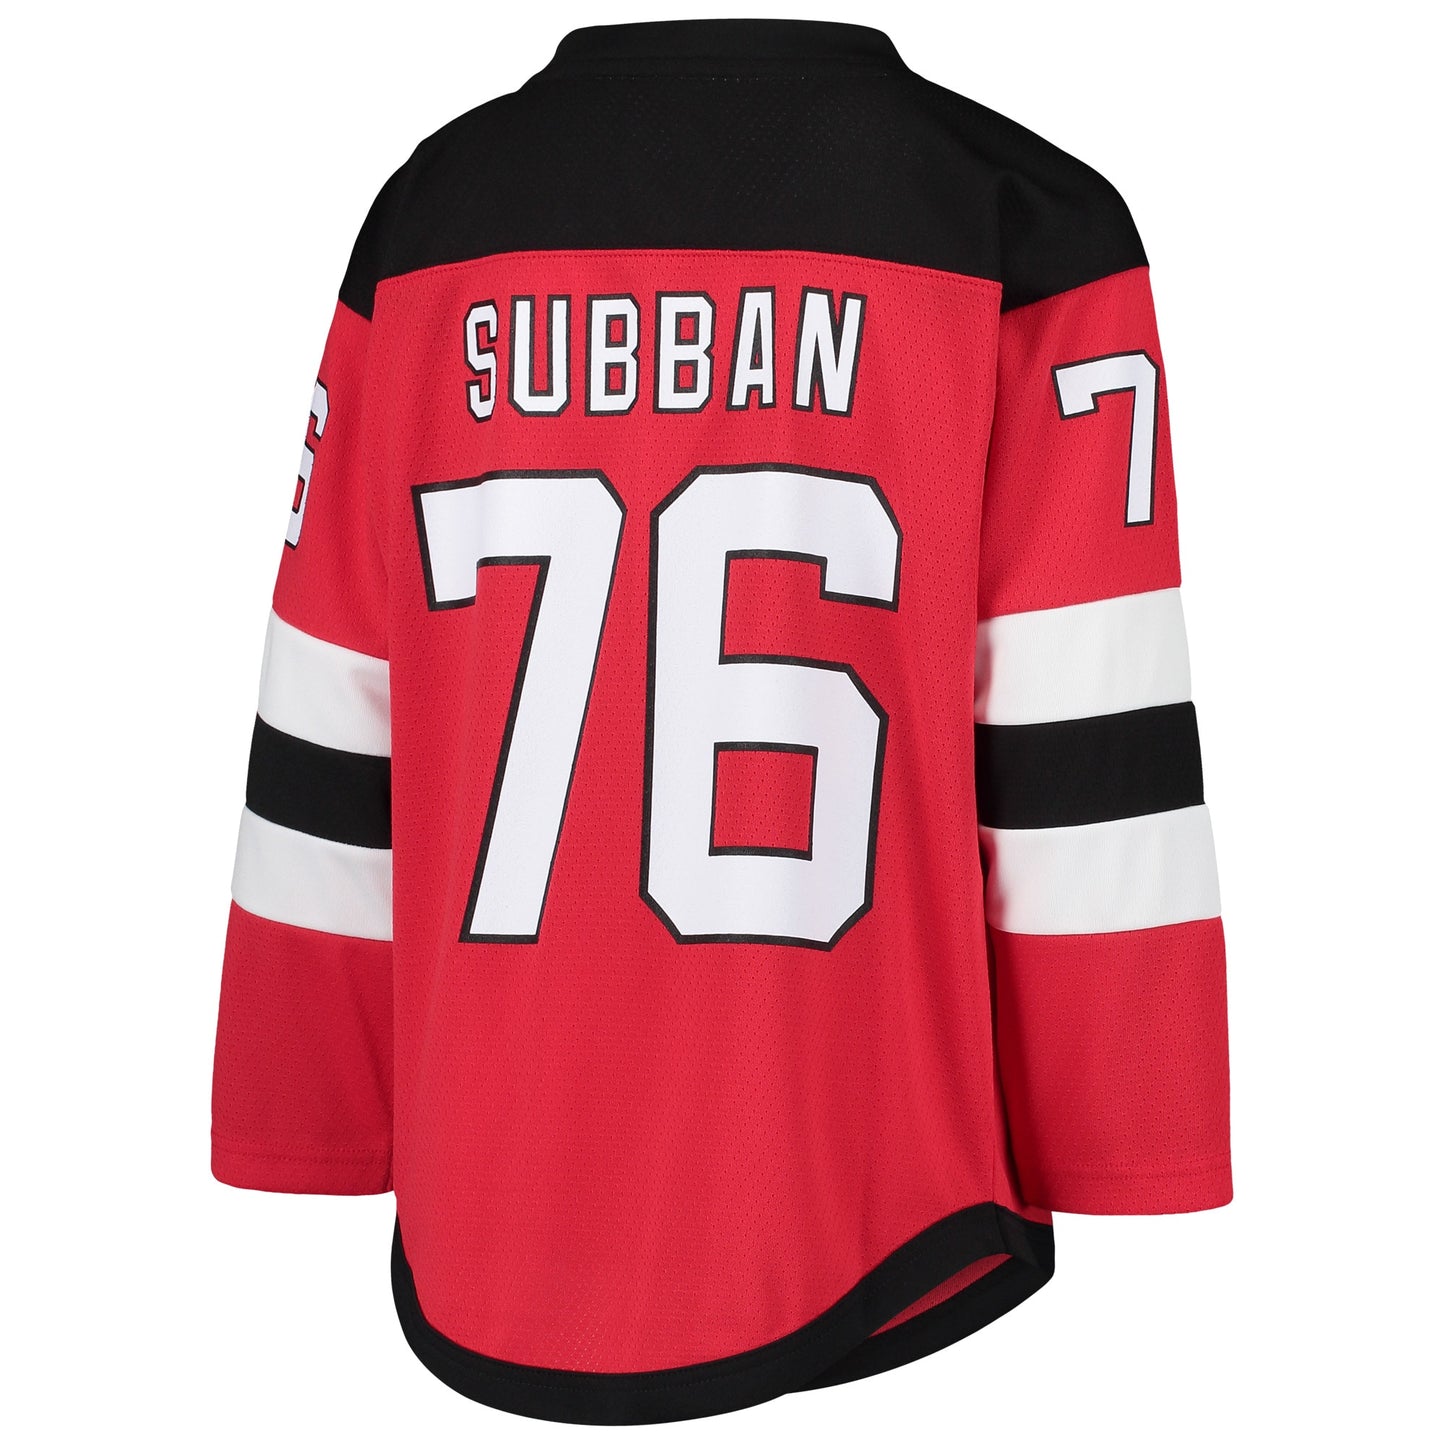 P.K. Subban New Jersey Devils Youth Home Player Replica Jersey - Red